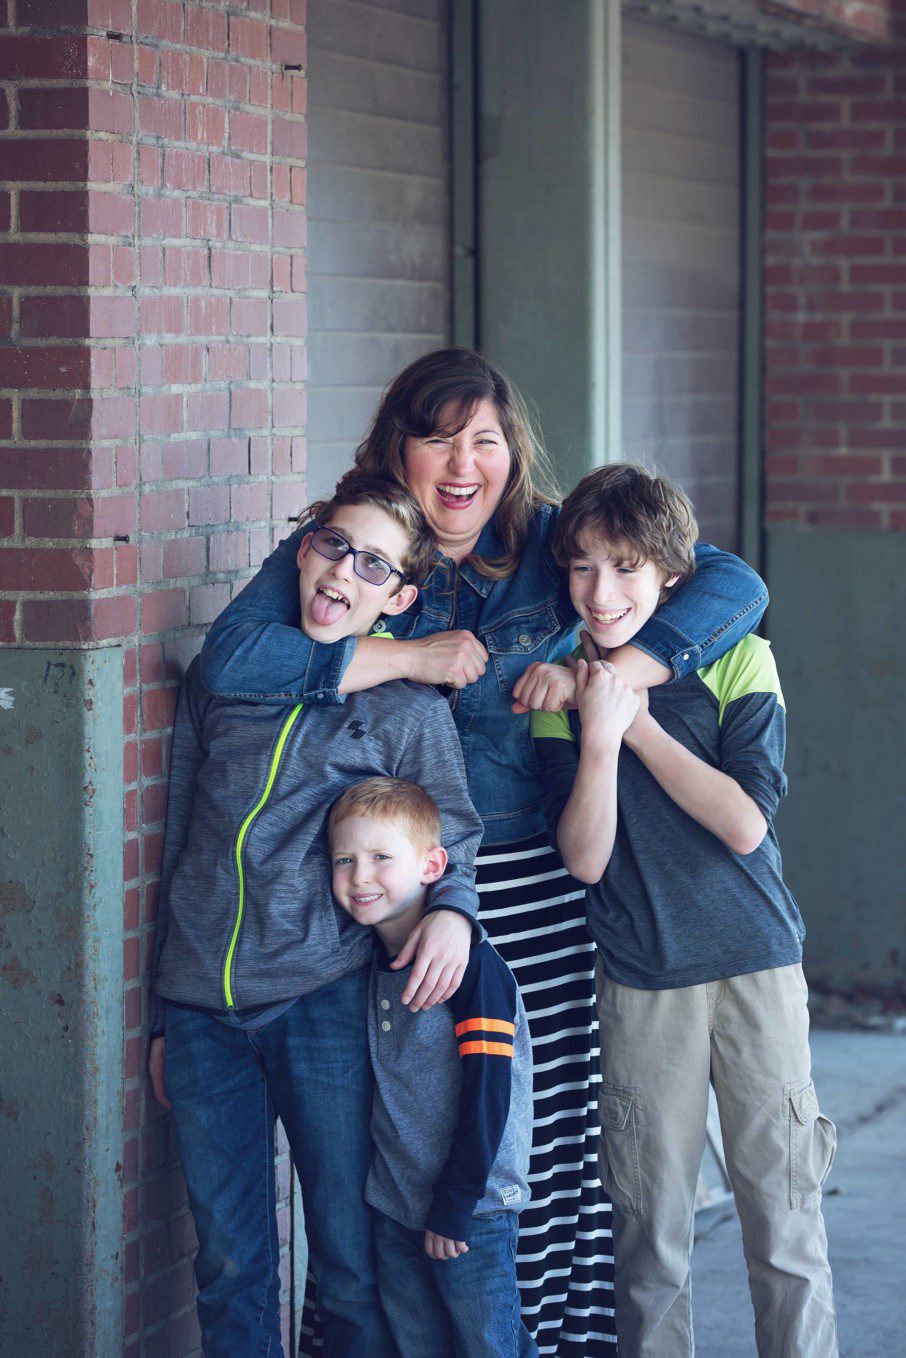 celebrate moms of boys.  Image of mother with three sons standing next to a brick wall in the Strip District..  Two of the boys are teens and mom has her arms around their necks.  The littlest boy is hugging his older brother.  They're are all grinning.  